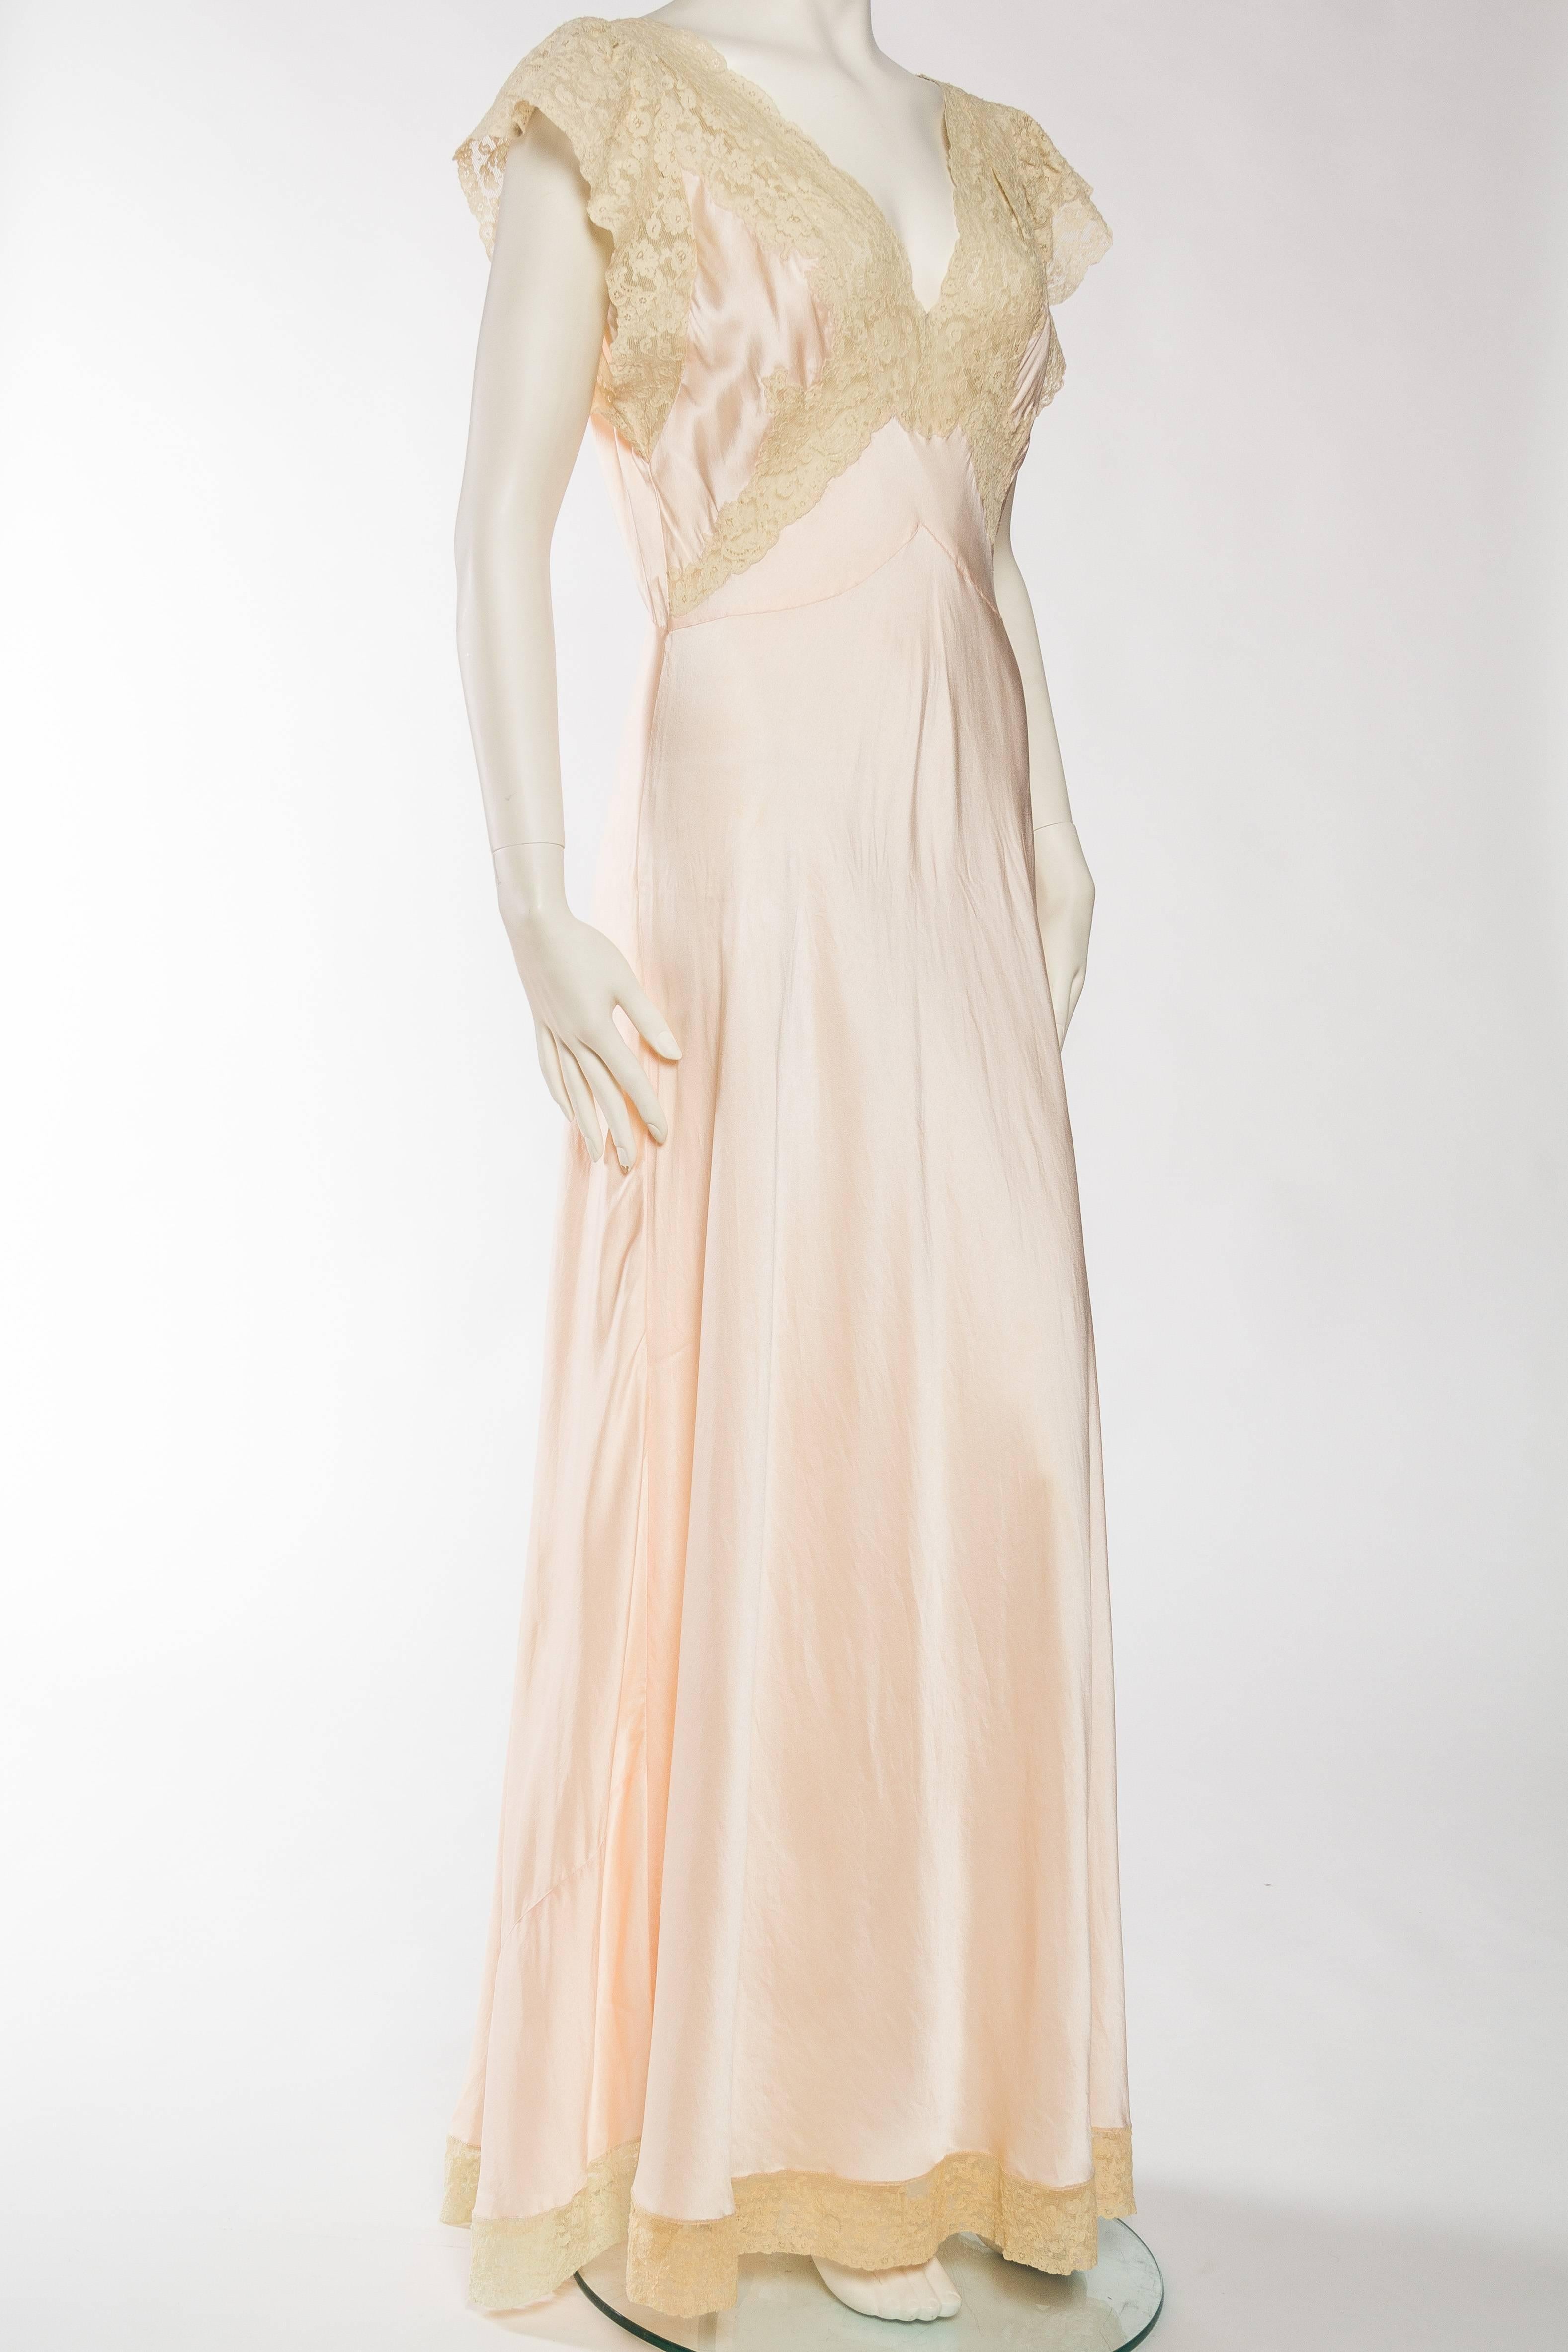 Antique Bias Cut Silk Negligee In Good Condition In New York, NY